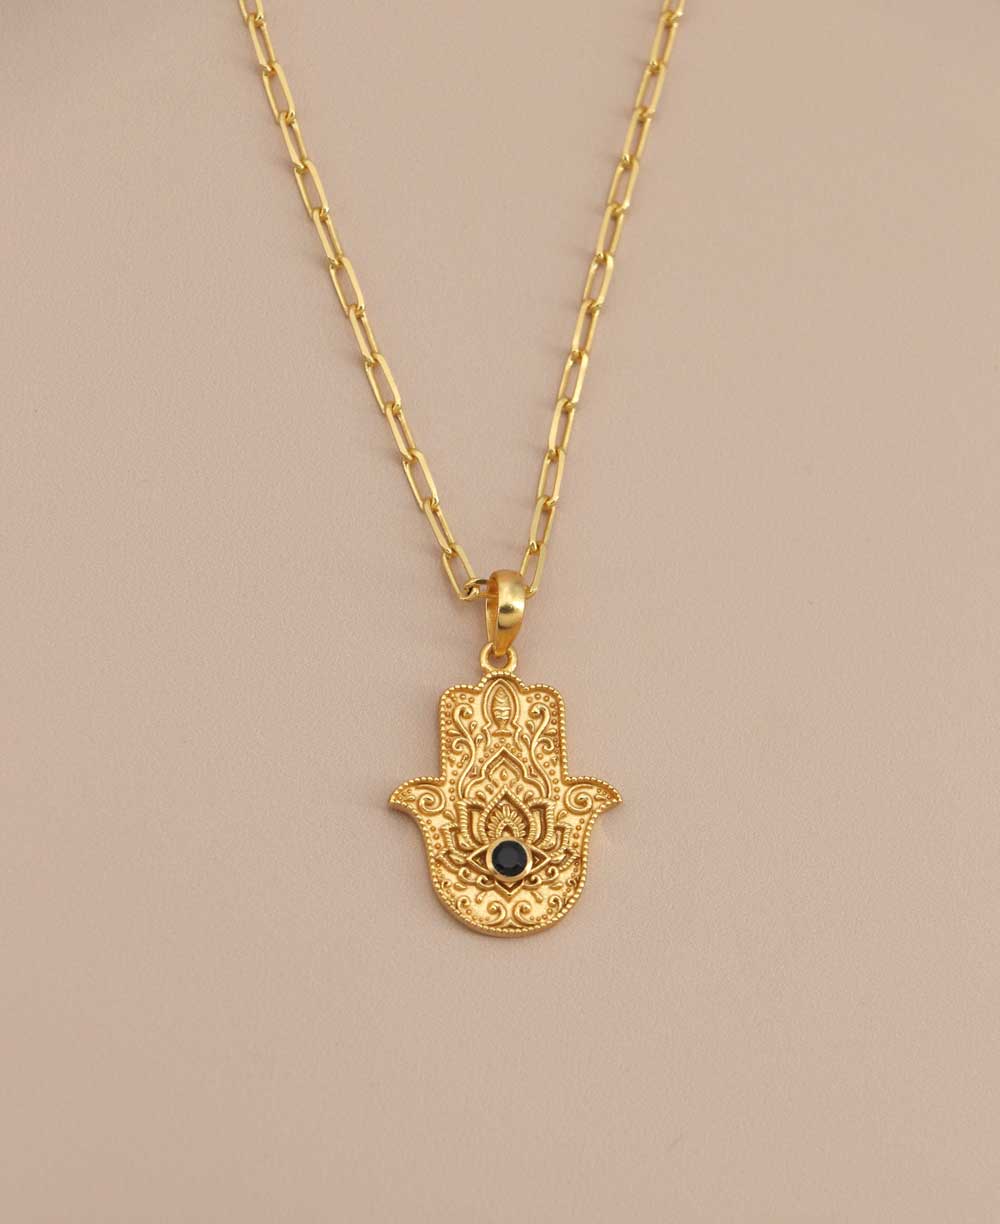 Divine Protection Hamsa Hand Necklace With Black Onyx Gemstone - Necklaces